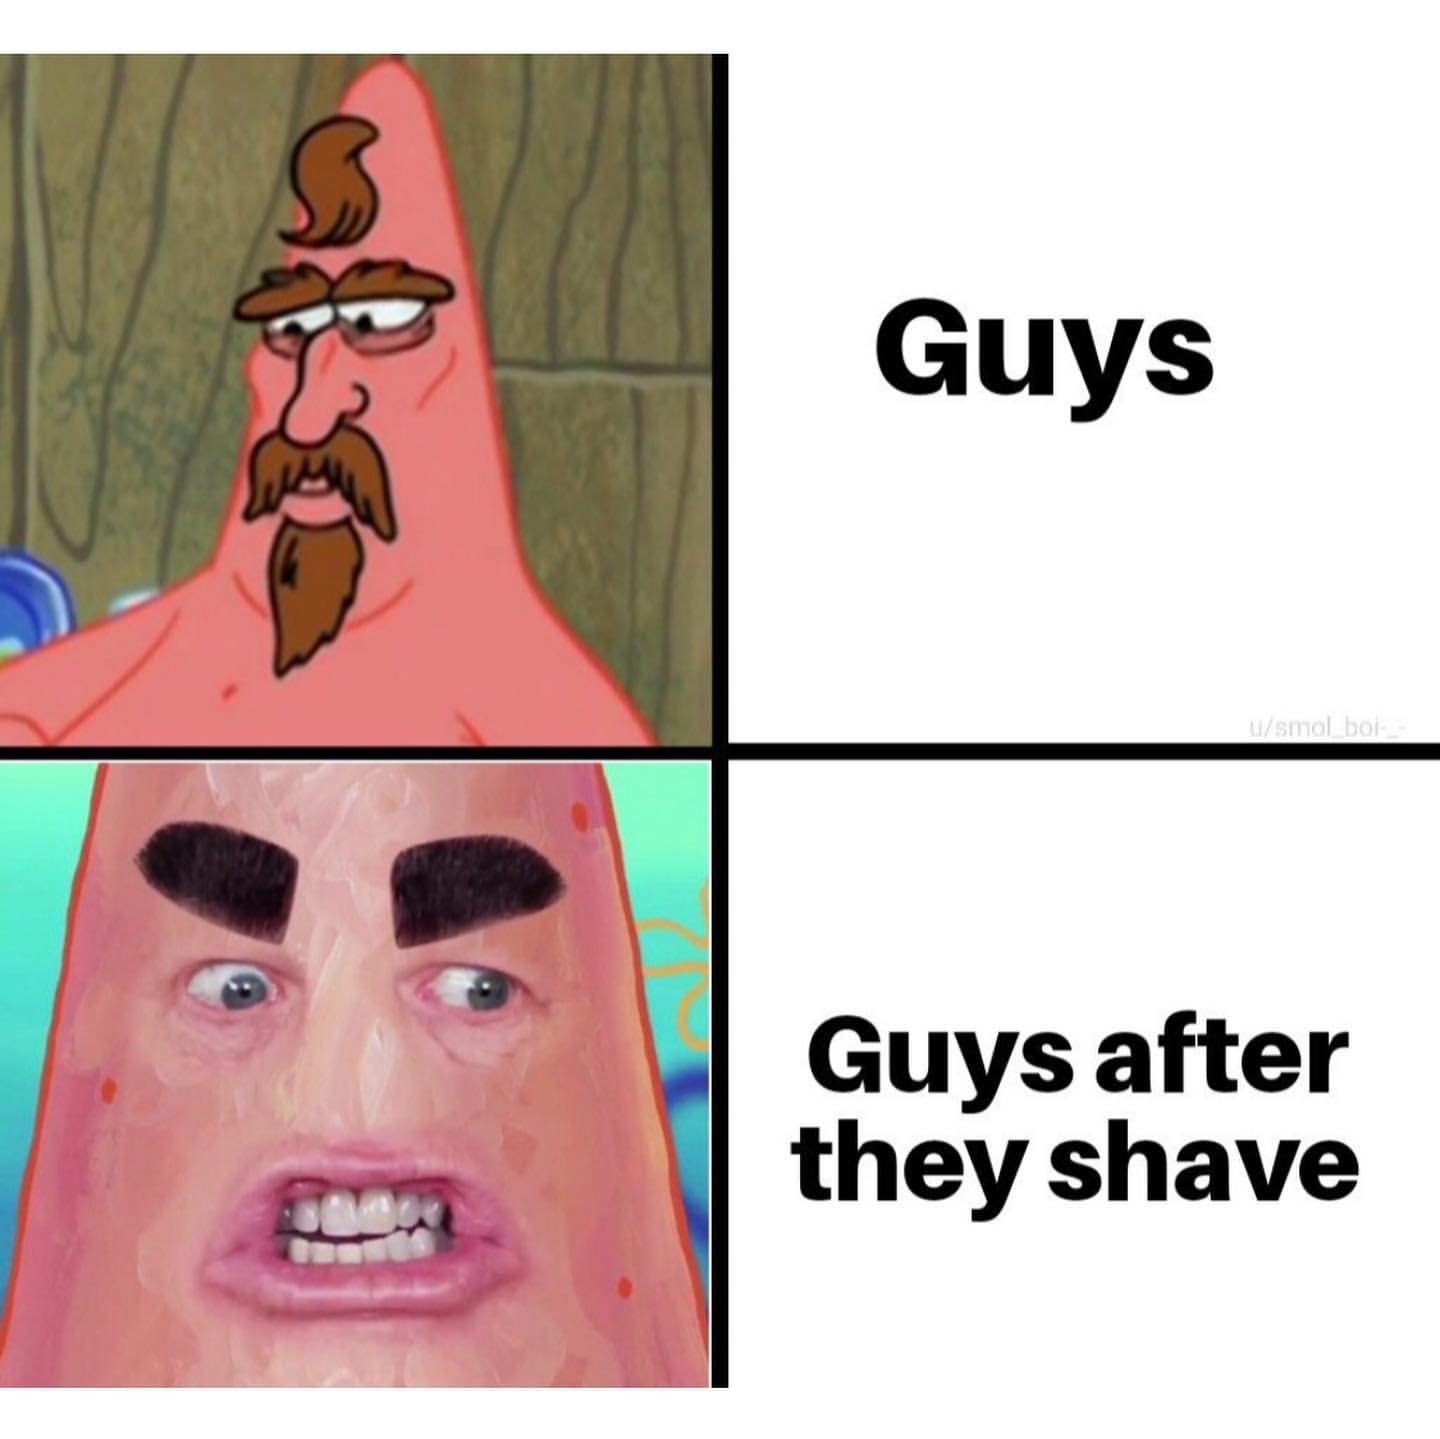 Guys. Guys after they shave.